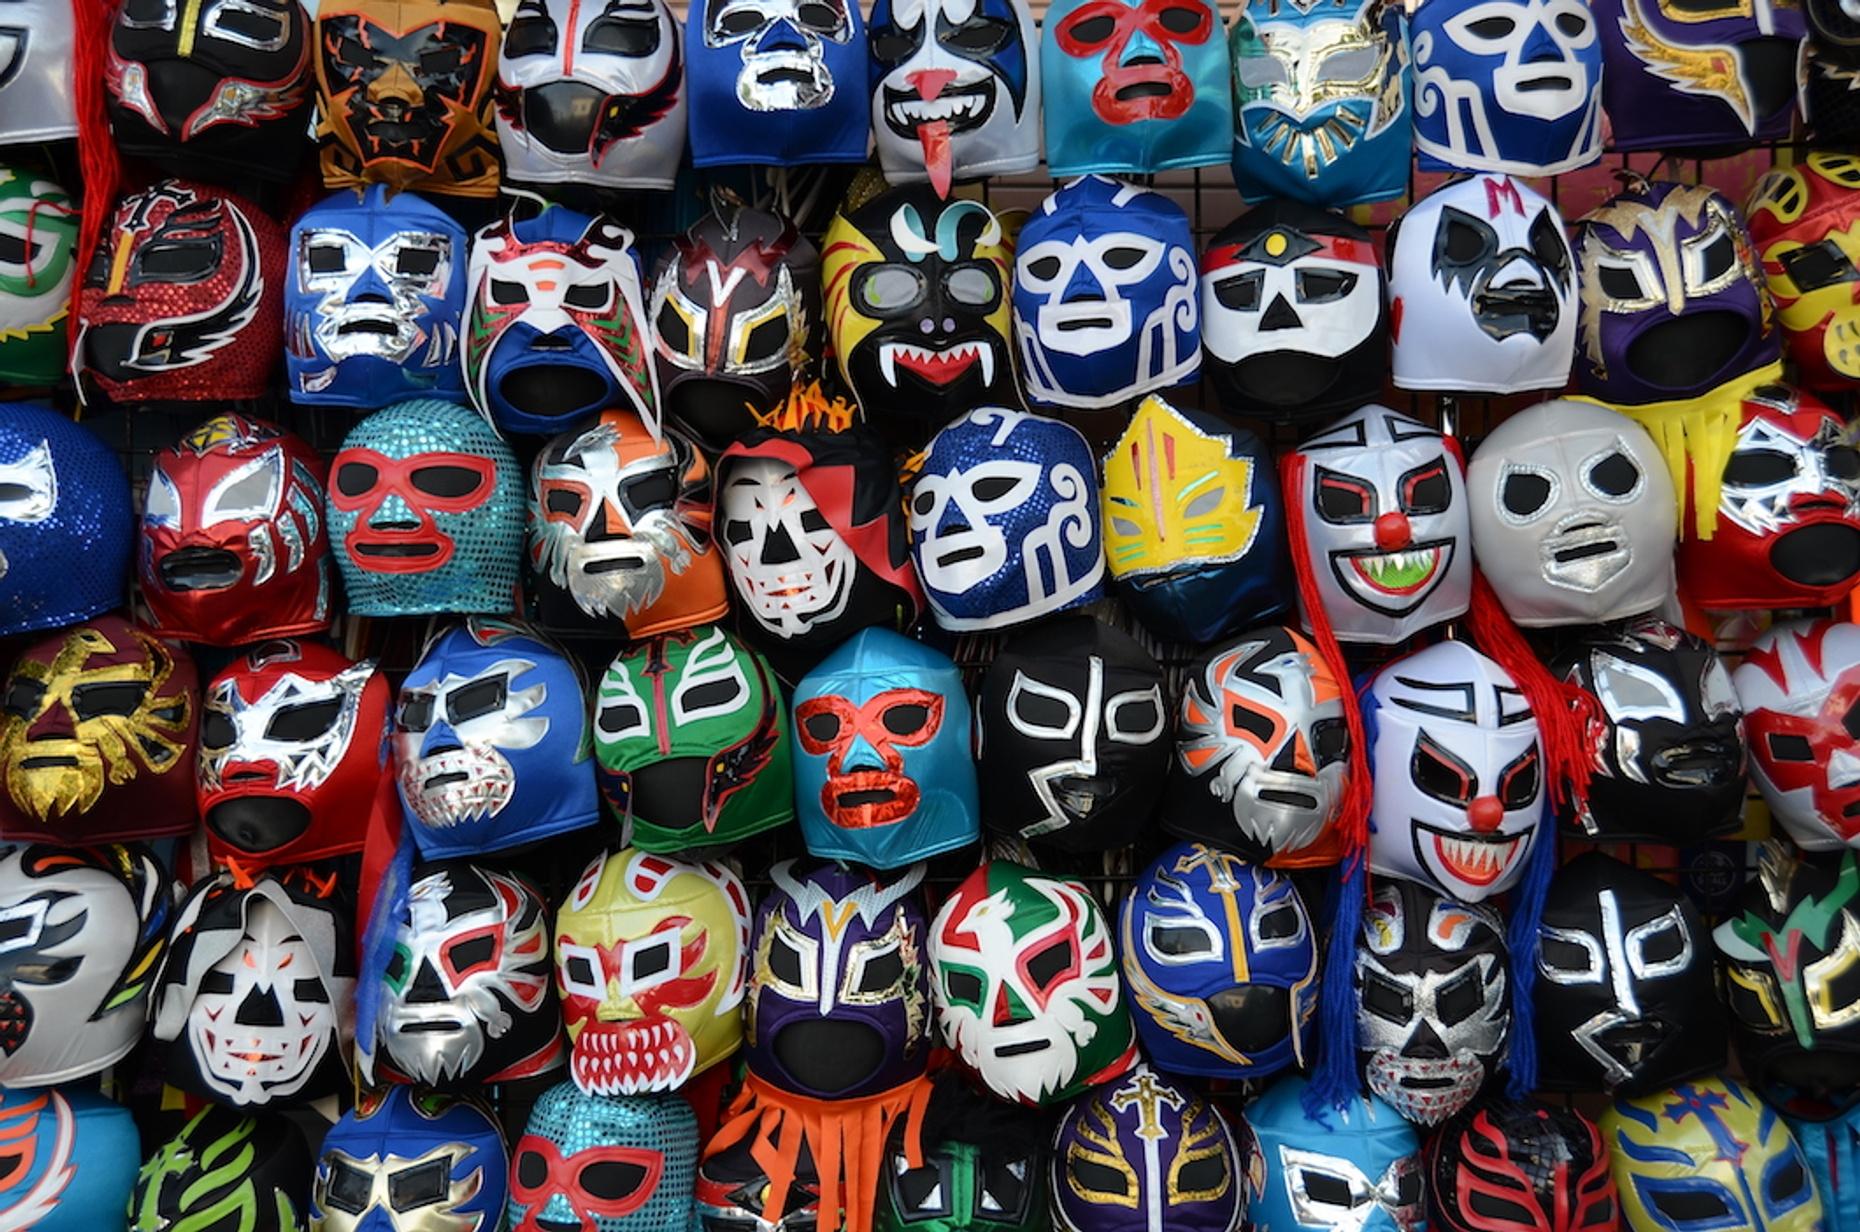 Mexico City Lucha Libre Show & Experience in Spanish